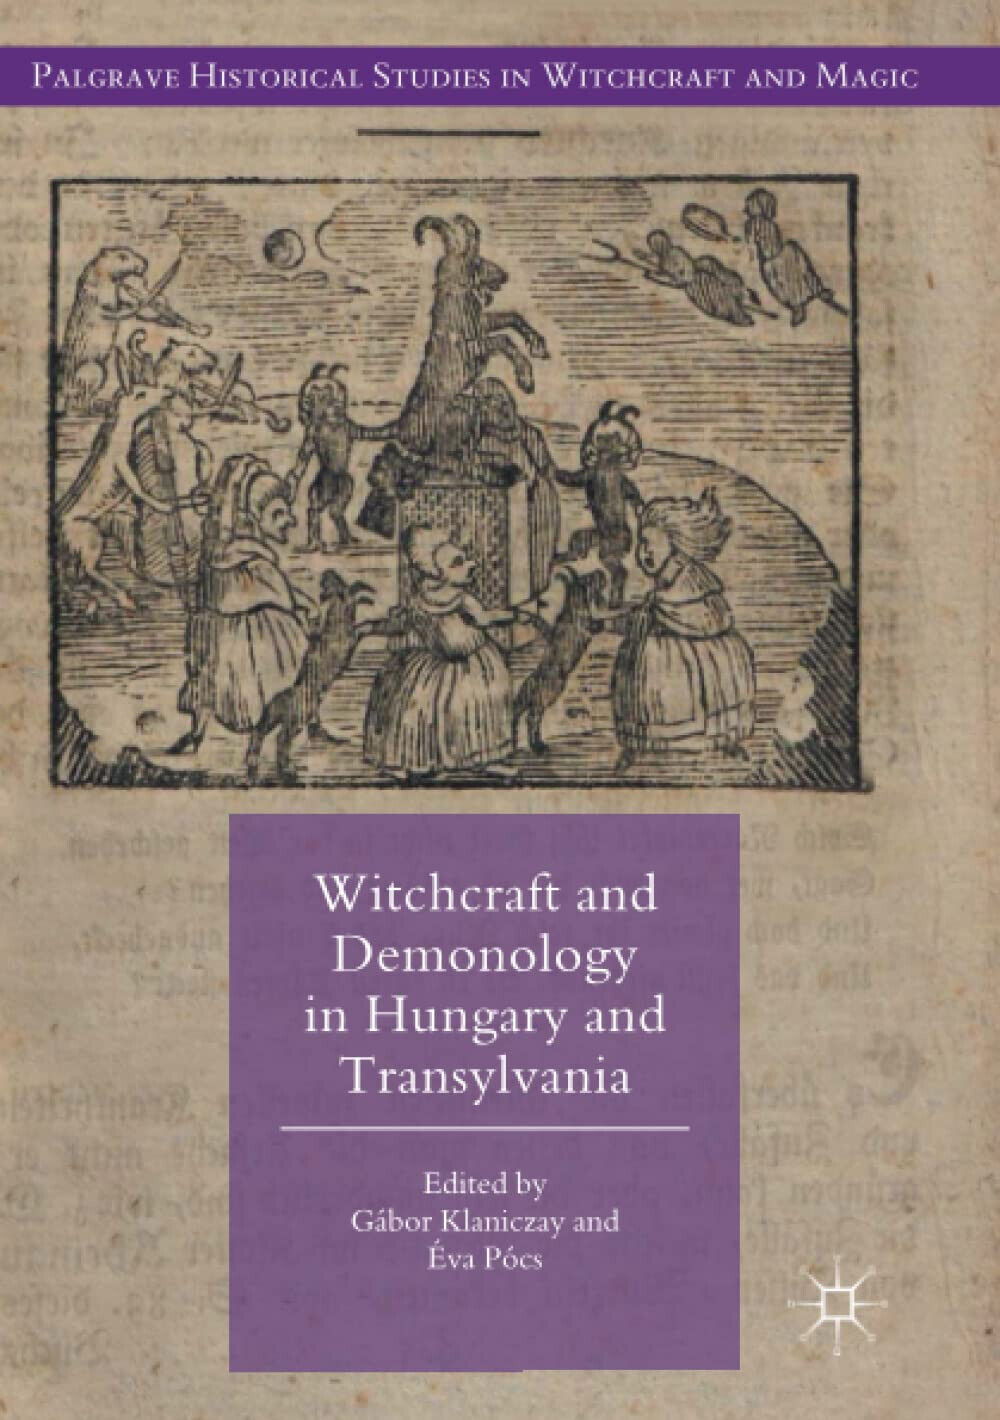 Witchcraft and Demonology in Hungary and Transylvania - G?bor Klaniczay - 2018